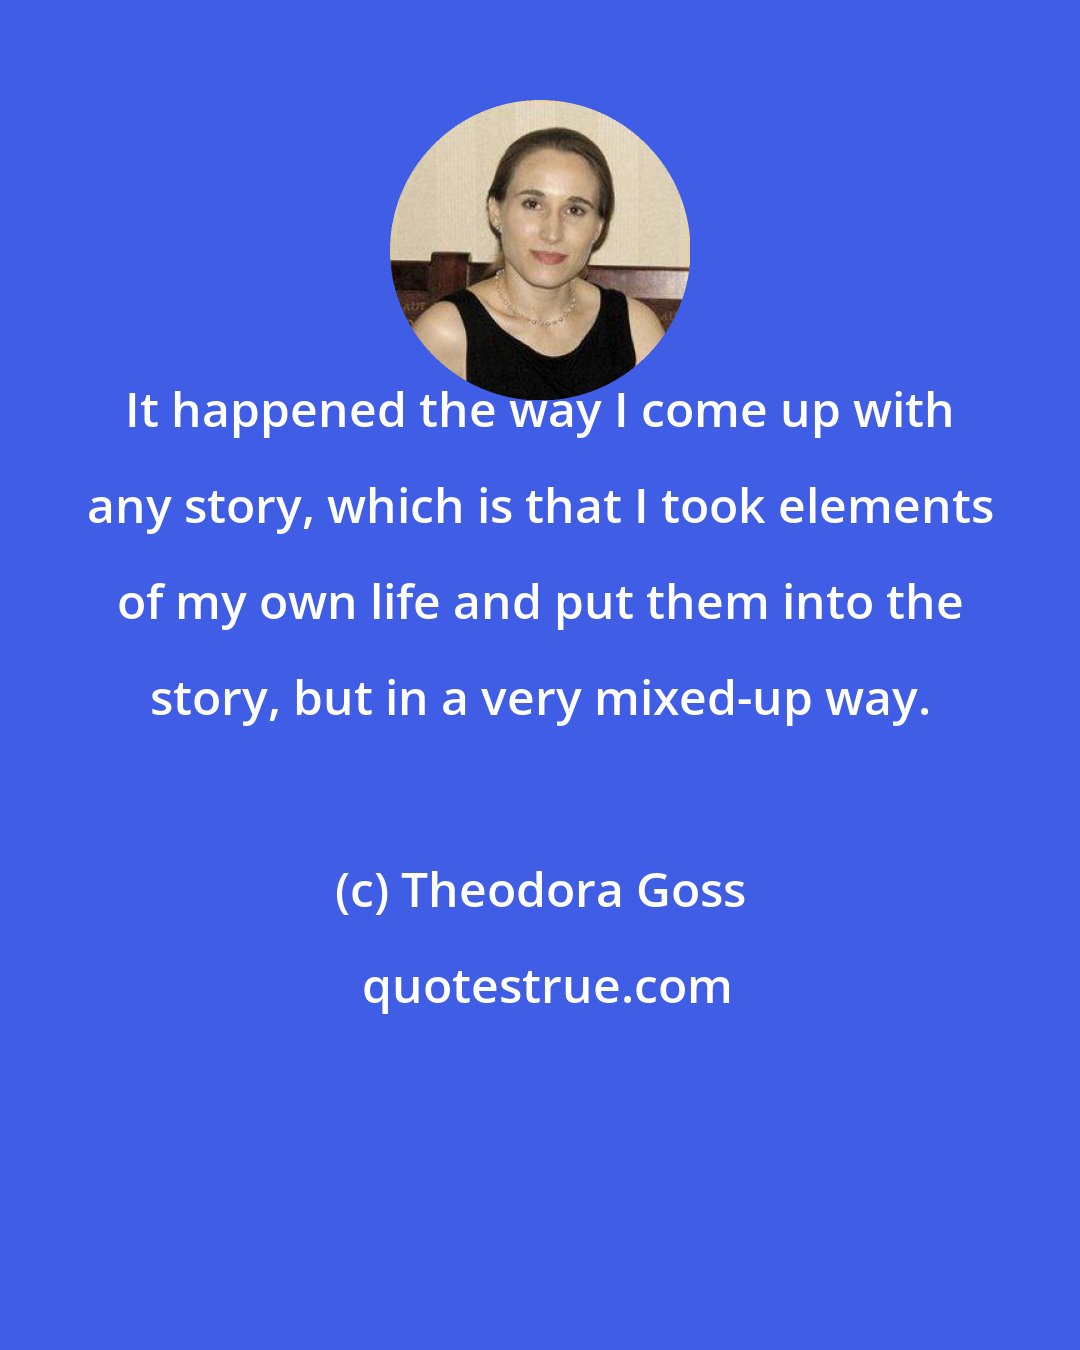 Theodora Goss: It happened the way I come up with any story, which is that I took elements of my own life and put them into the story, but in a very mixed-up way.